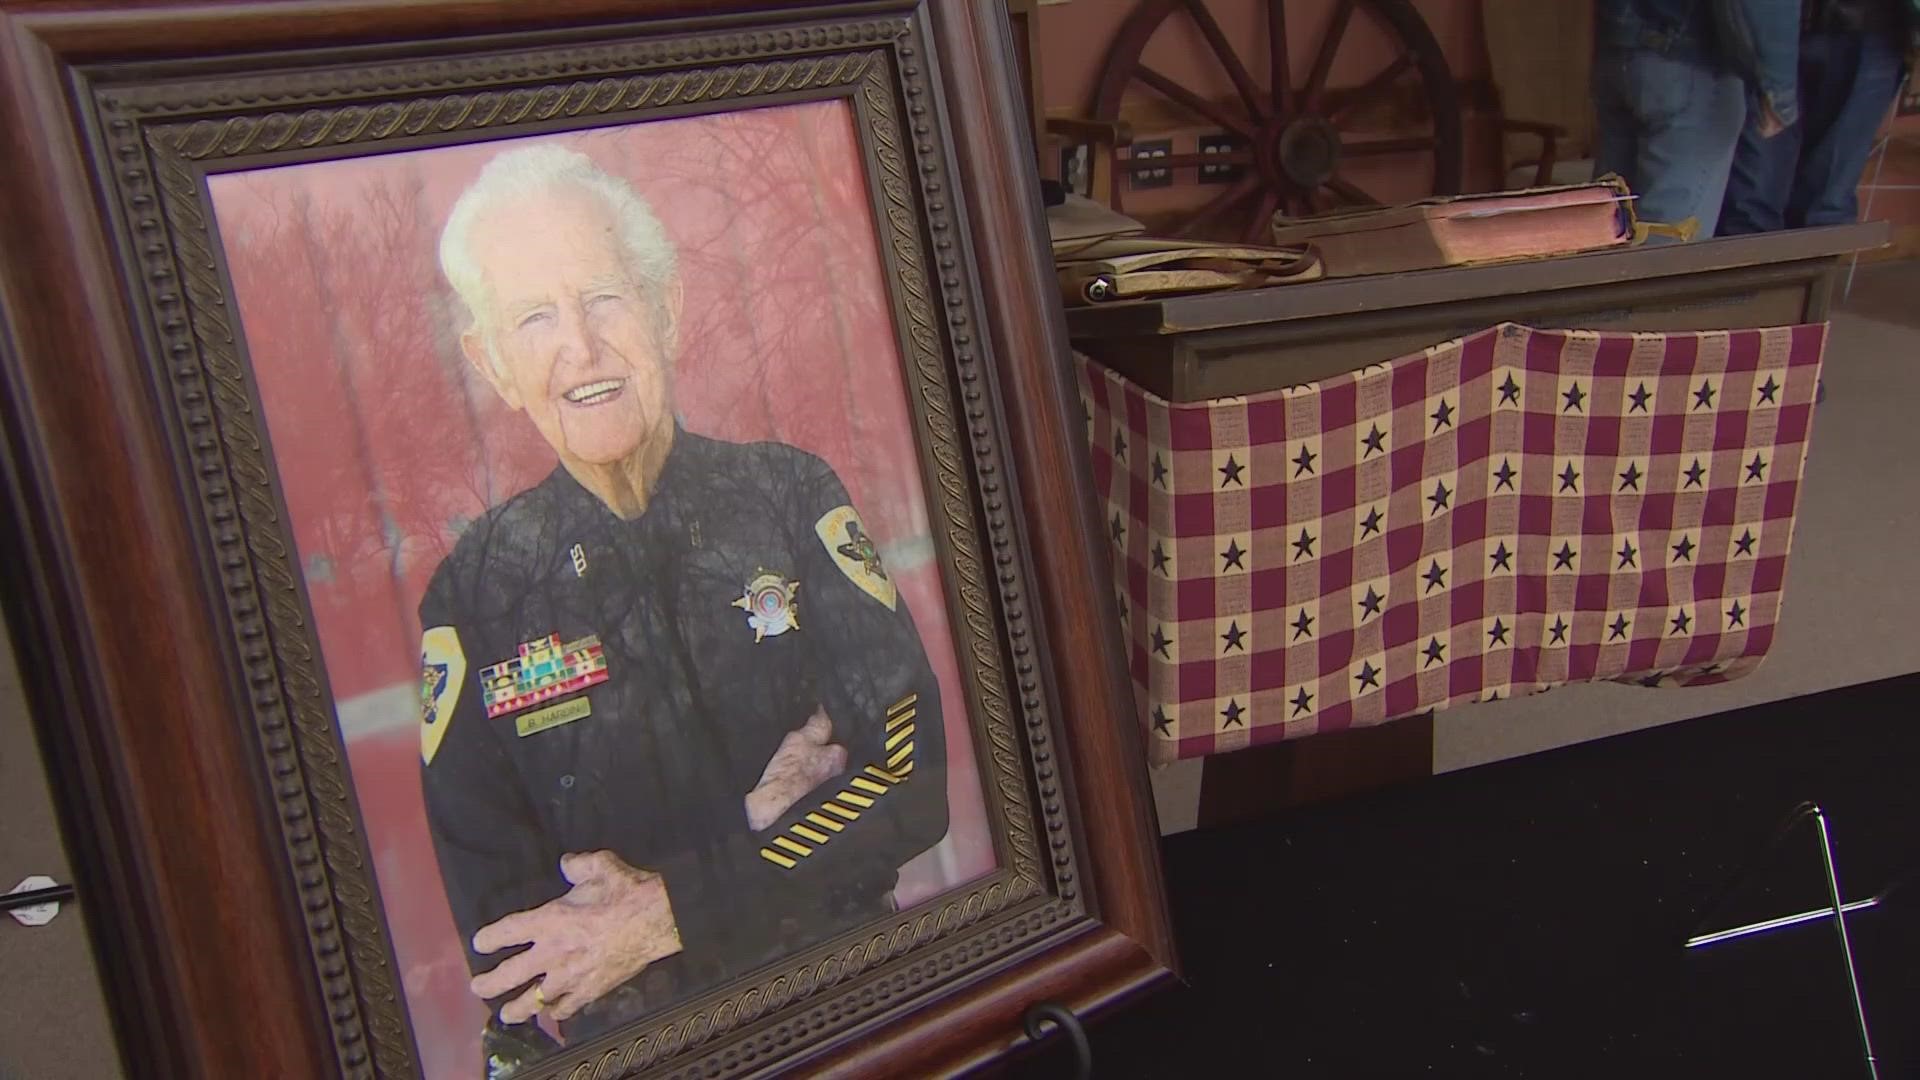 Bill Hardin served in law enforcement for 76 years and died last week at 99 years old.